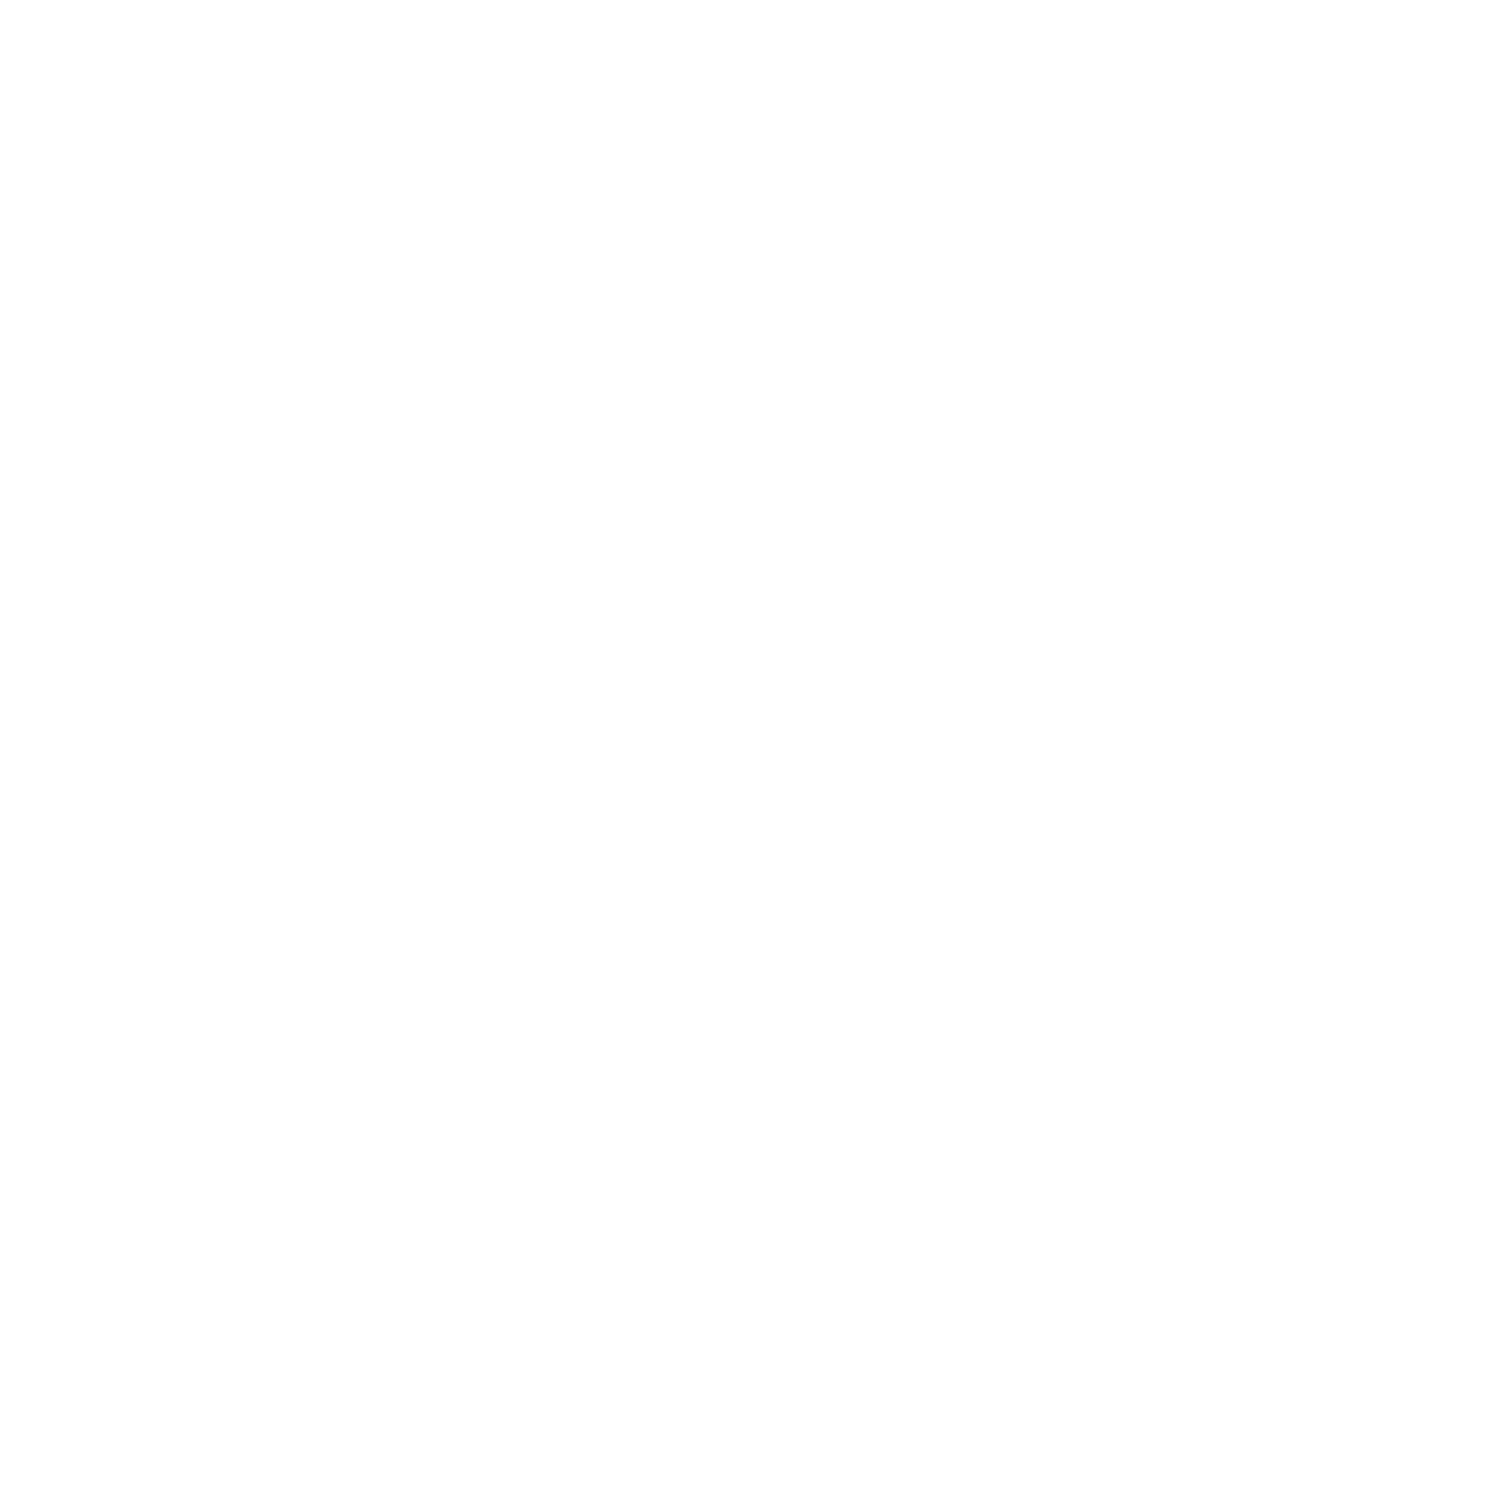 The Wonderfully Lost